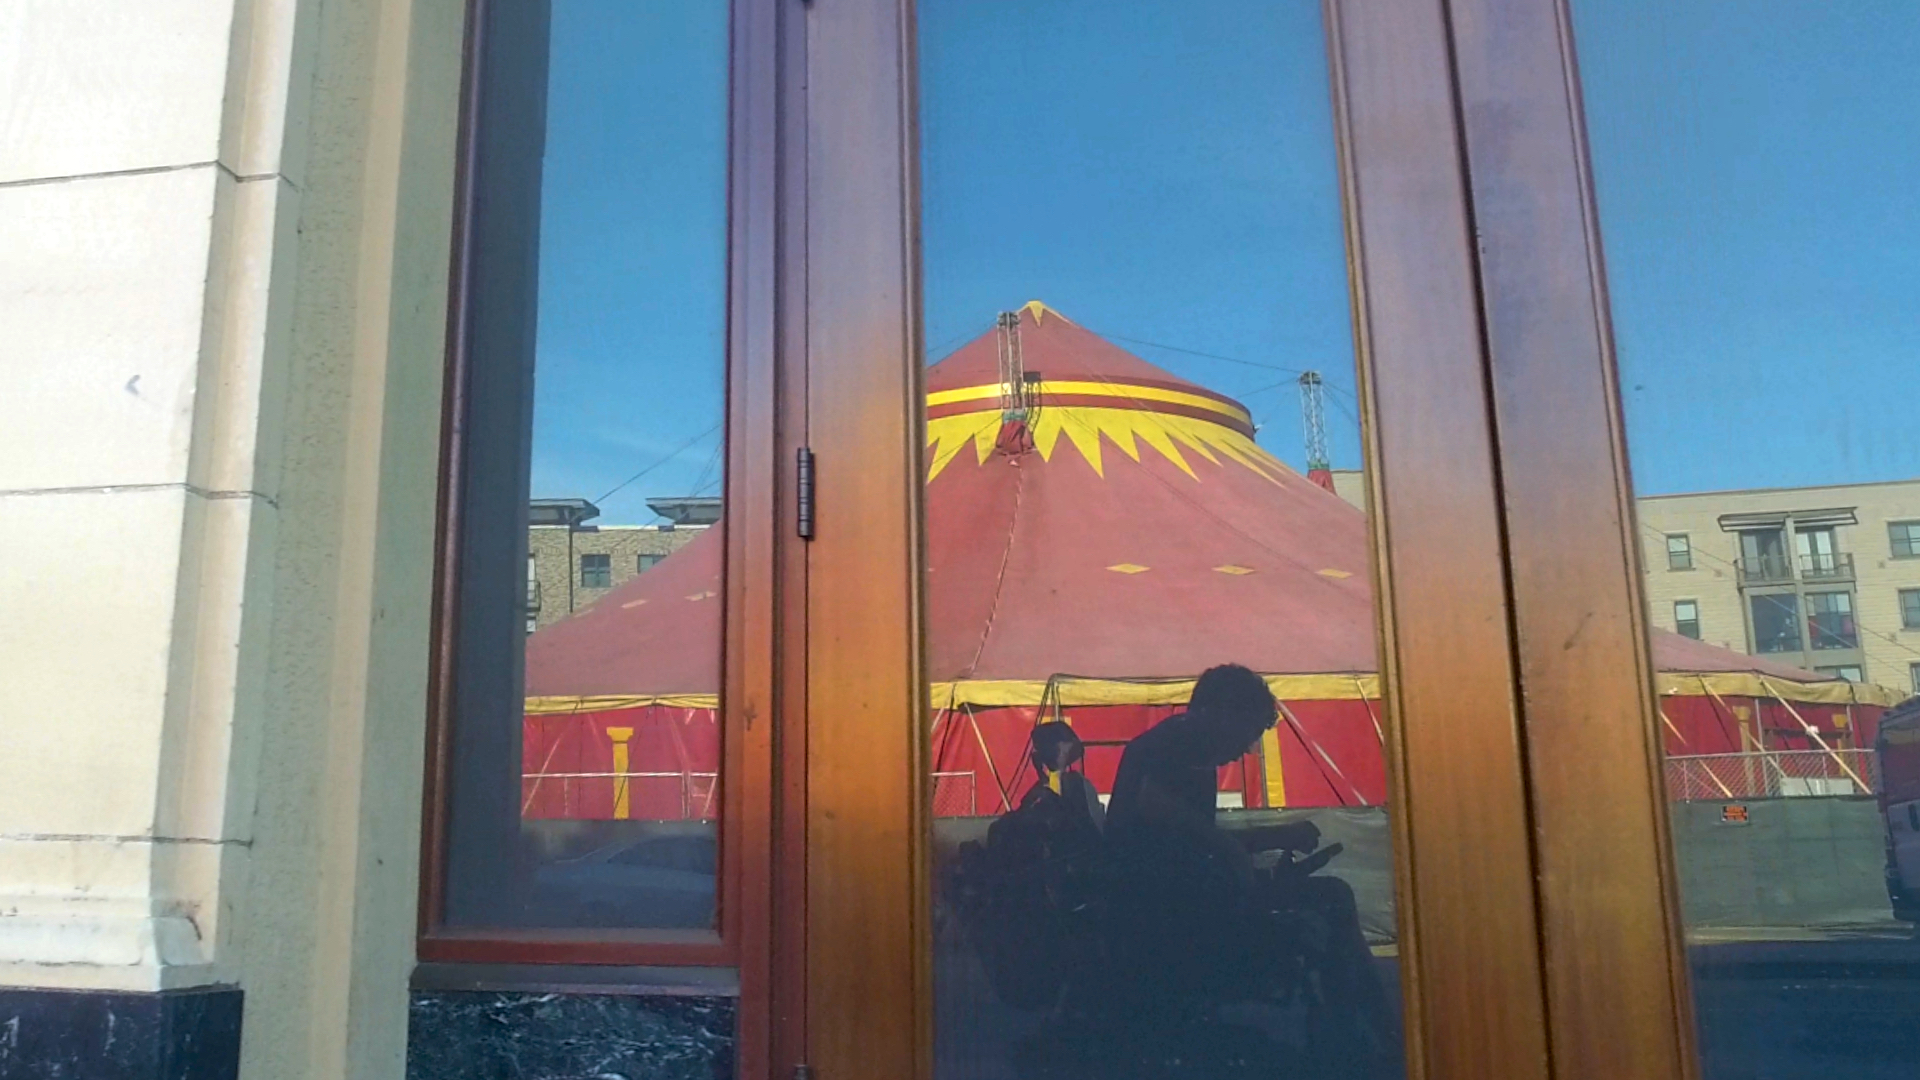 Reflection of circus tent and person in wheelchair in window